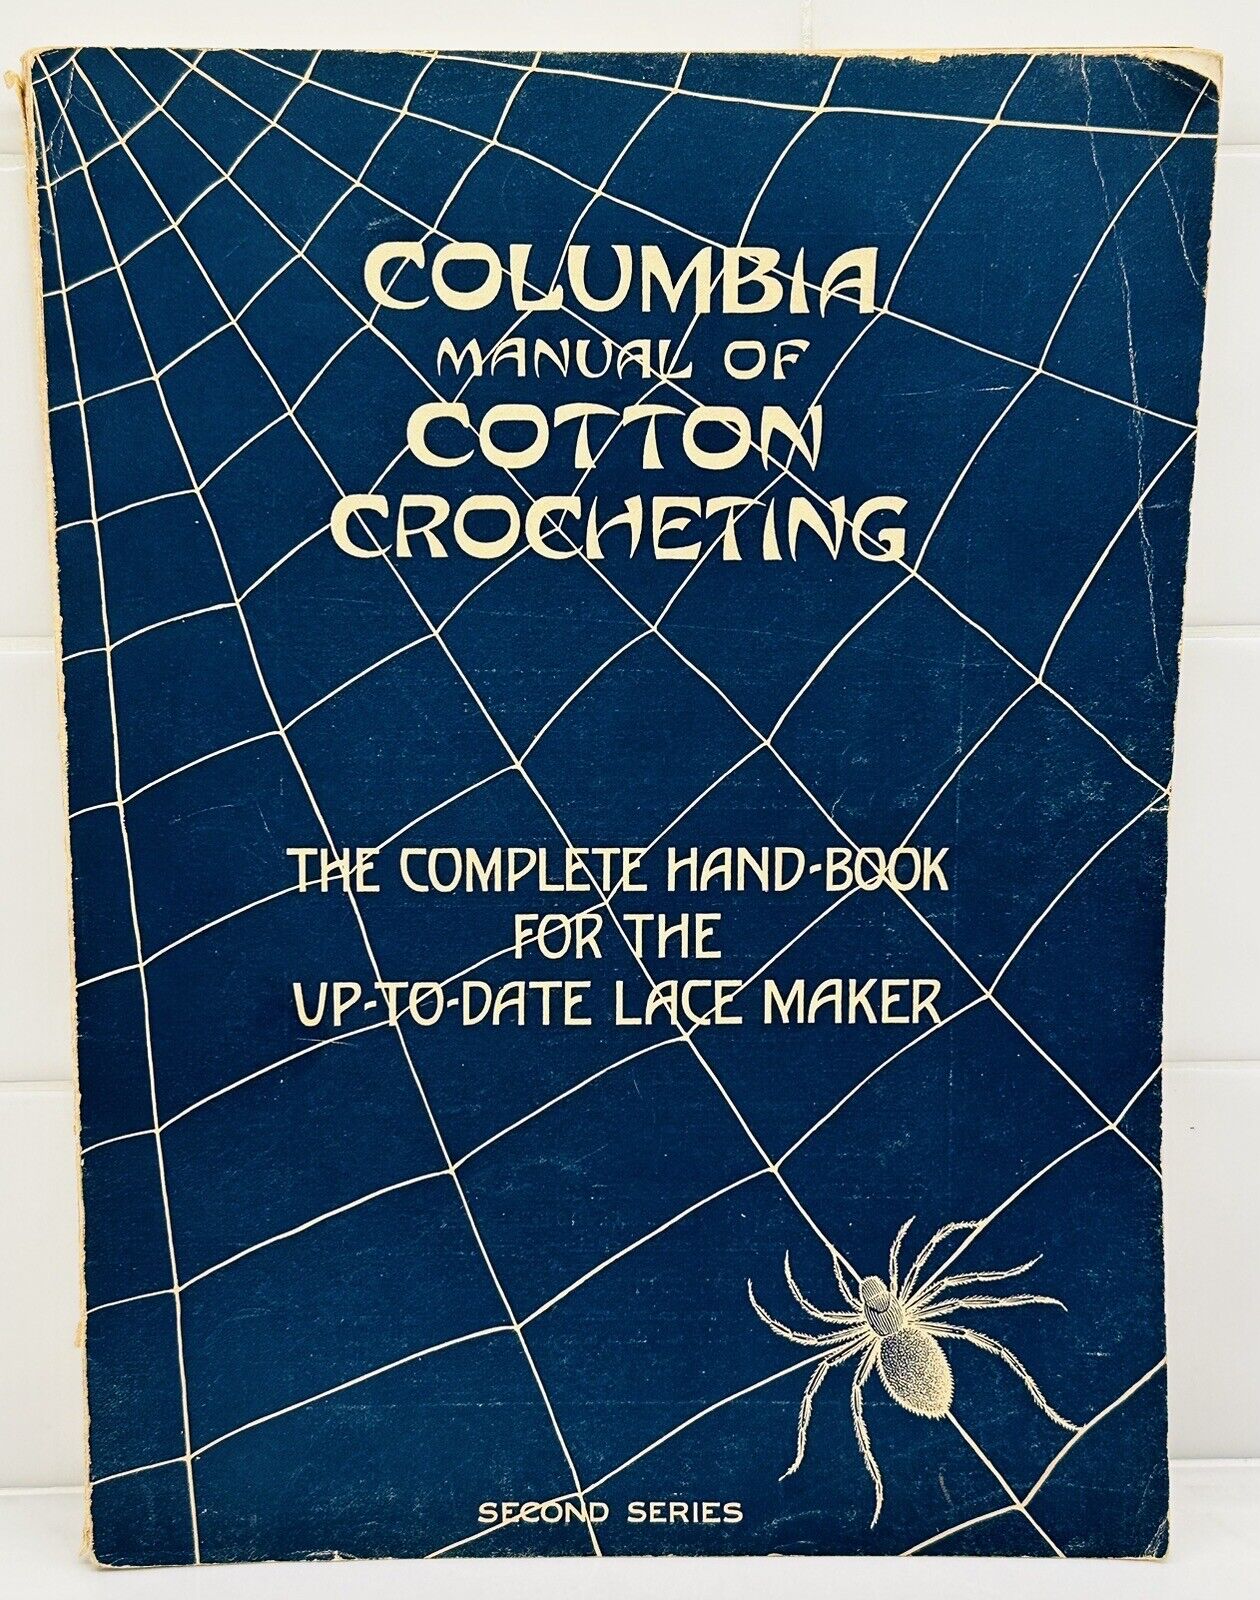 Vintage Columbia Manual of Cotton Crocheting Second Series 1914. Lace Maker